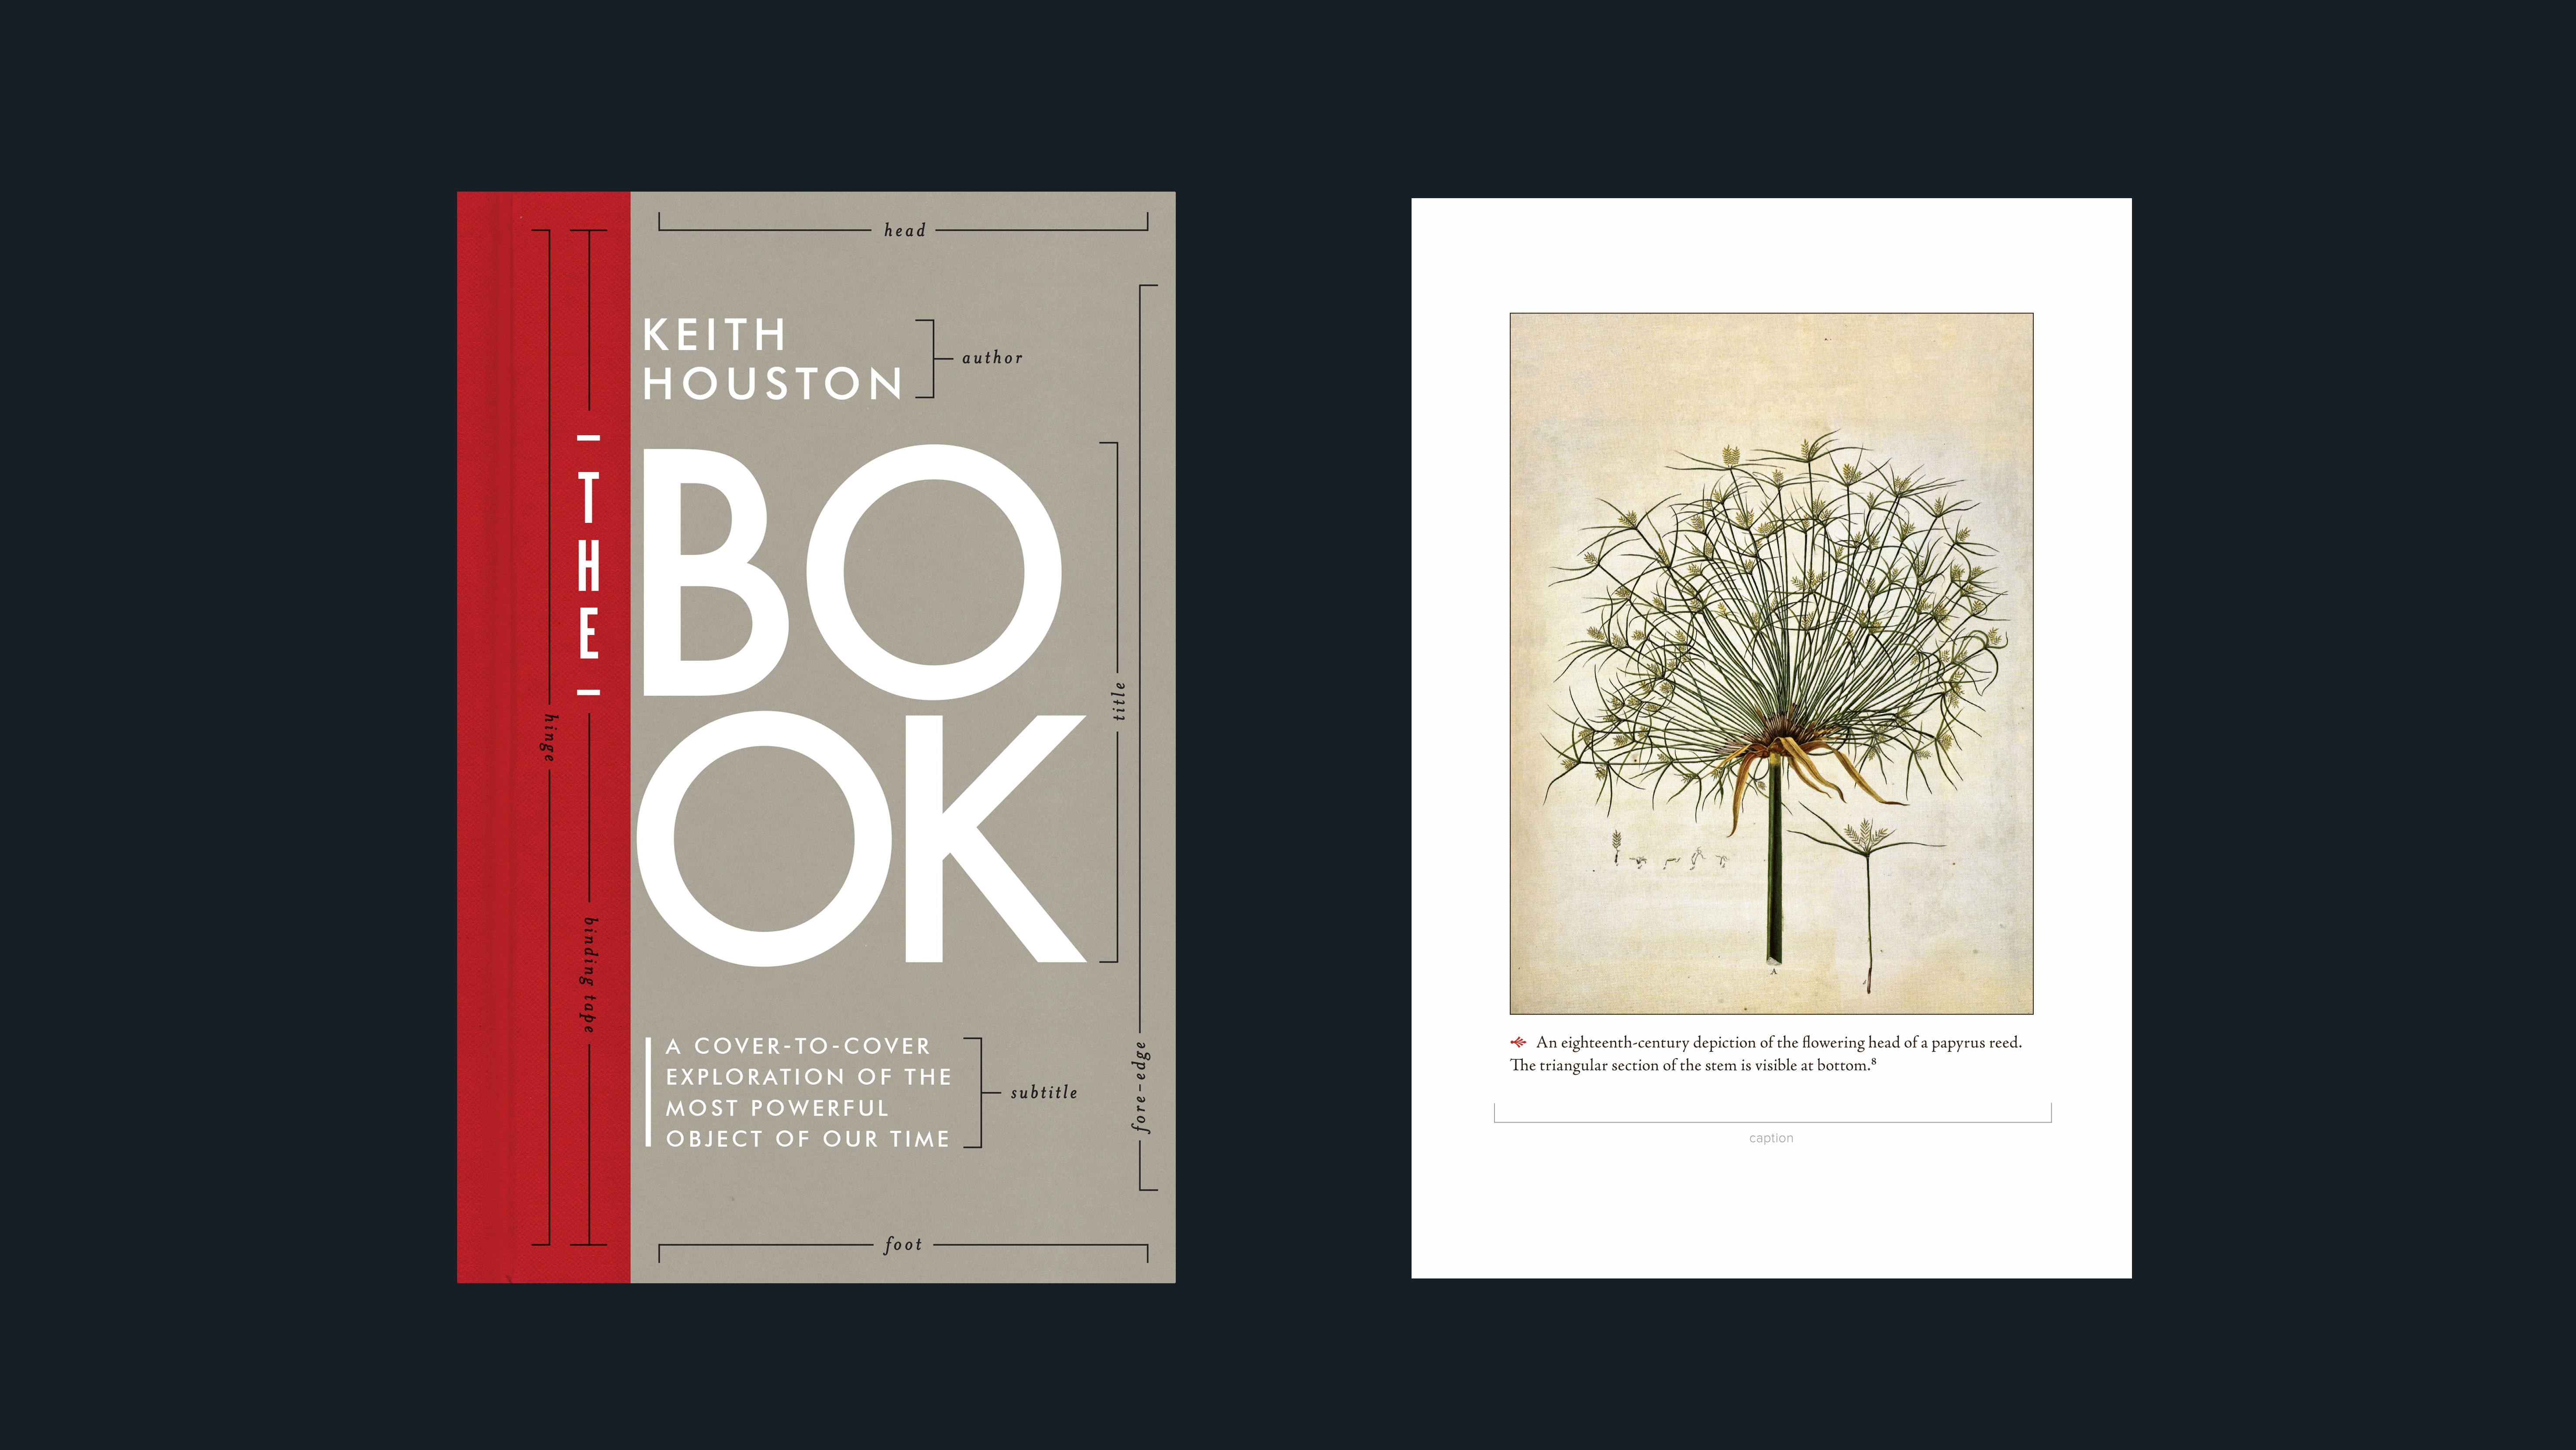 The Book: A Cover-to-Cover Exploration of the Most Powerful Object of Our  Time